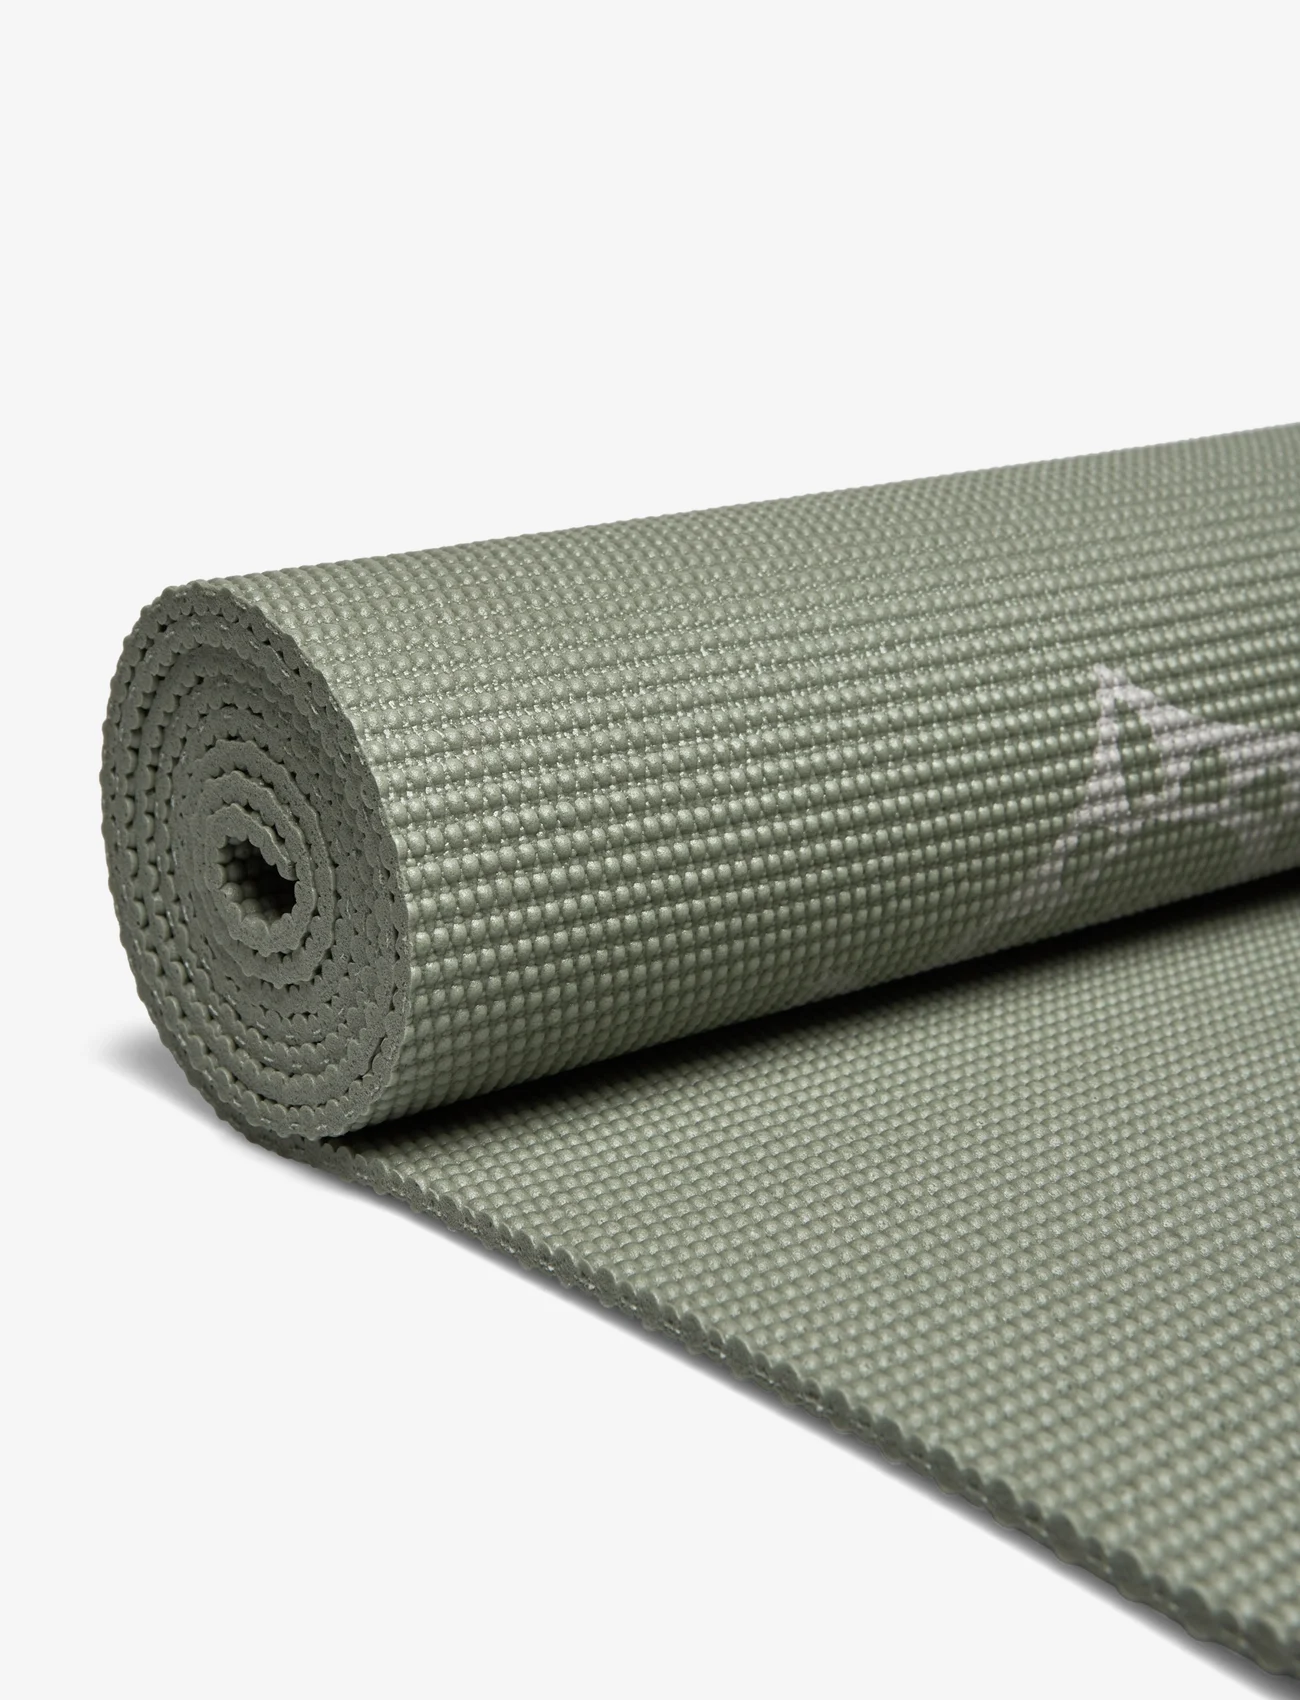 Gaiam - Olive Marrakesh Yoga Mat 5mm Classic Printed - lowest prices - olive - 1